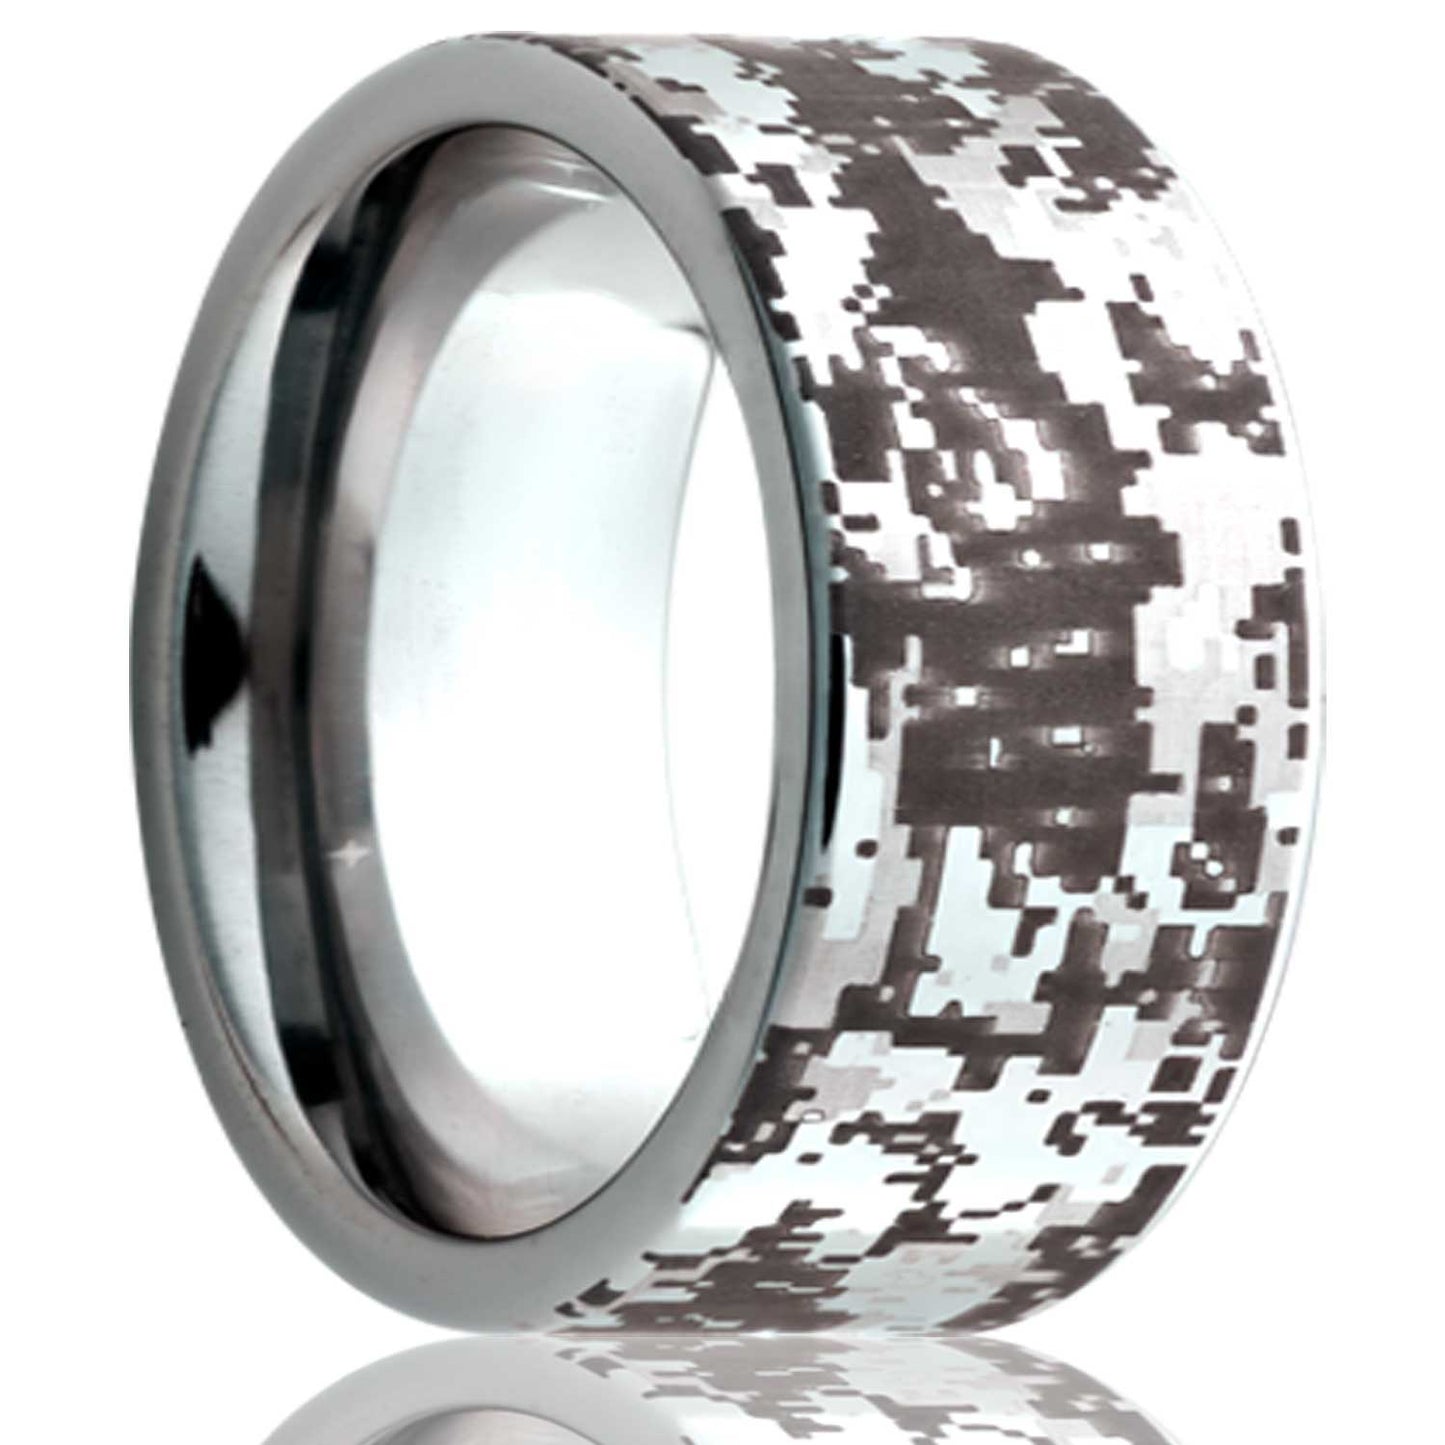 A digital camo cobalt wedding band displayed on a neutral white background.